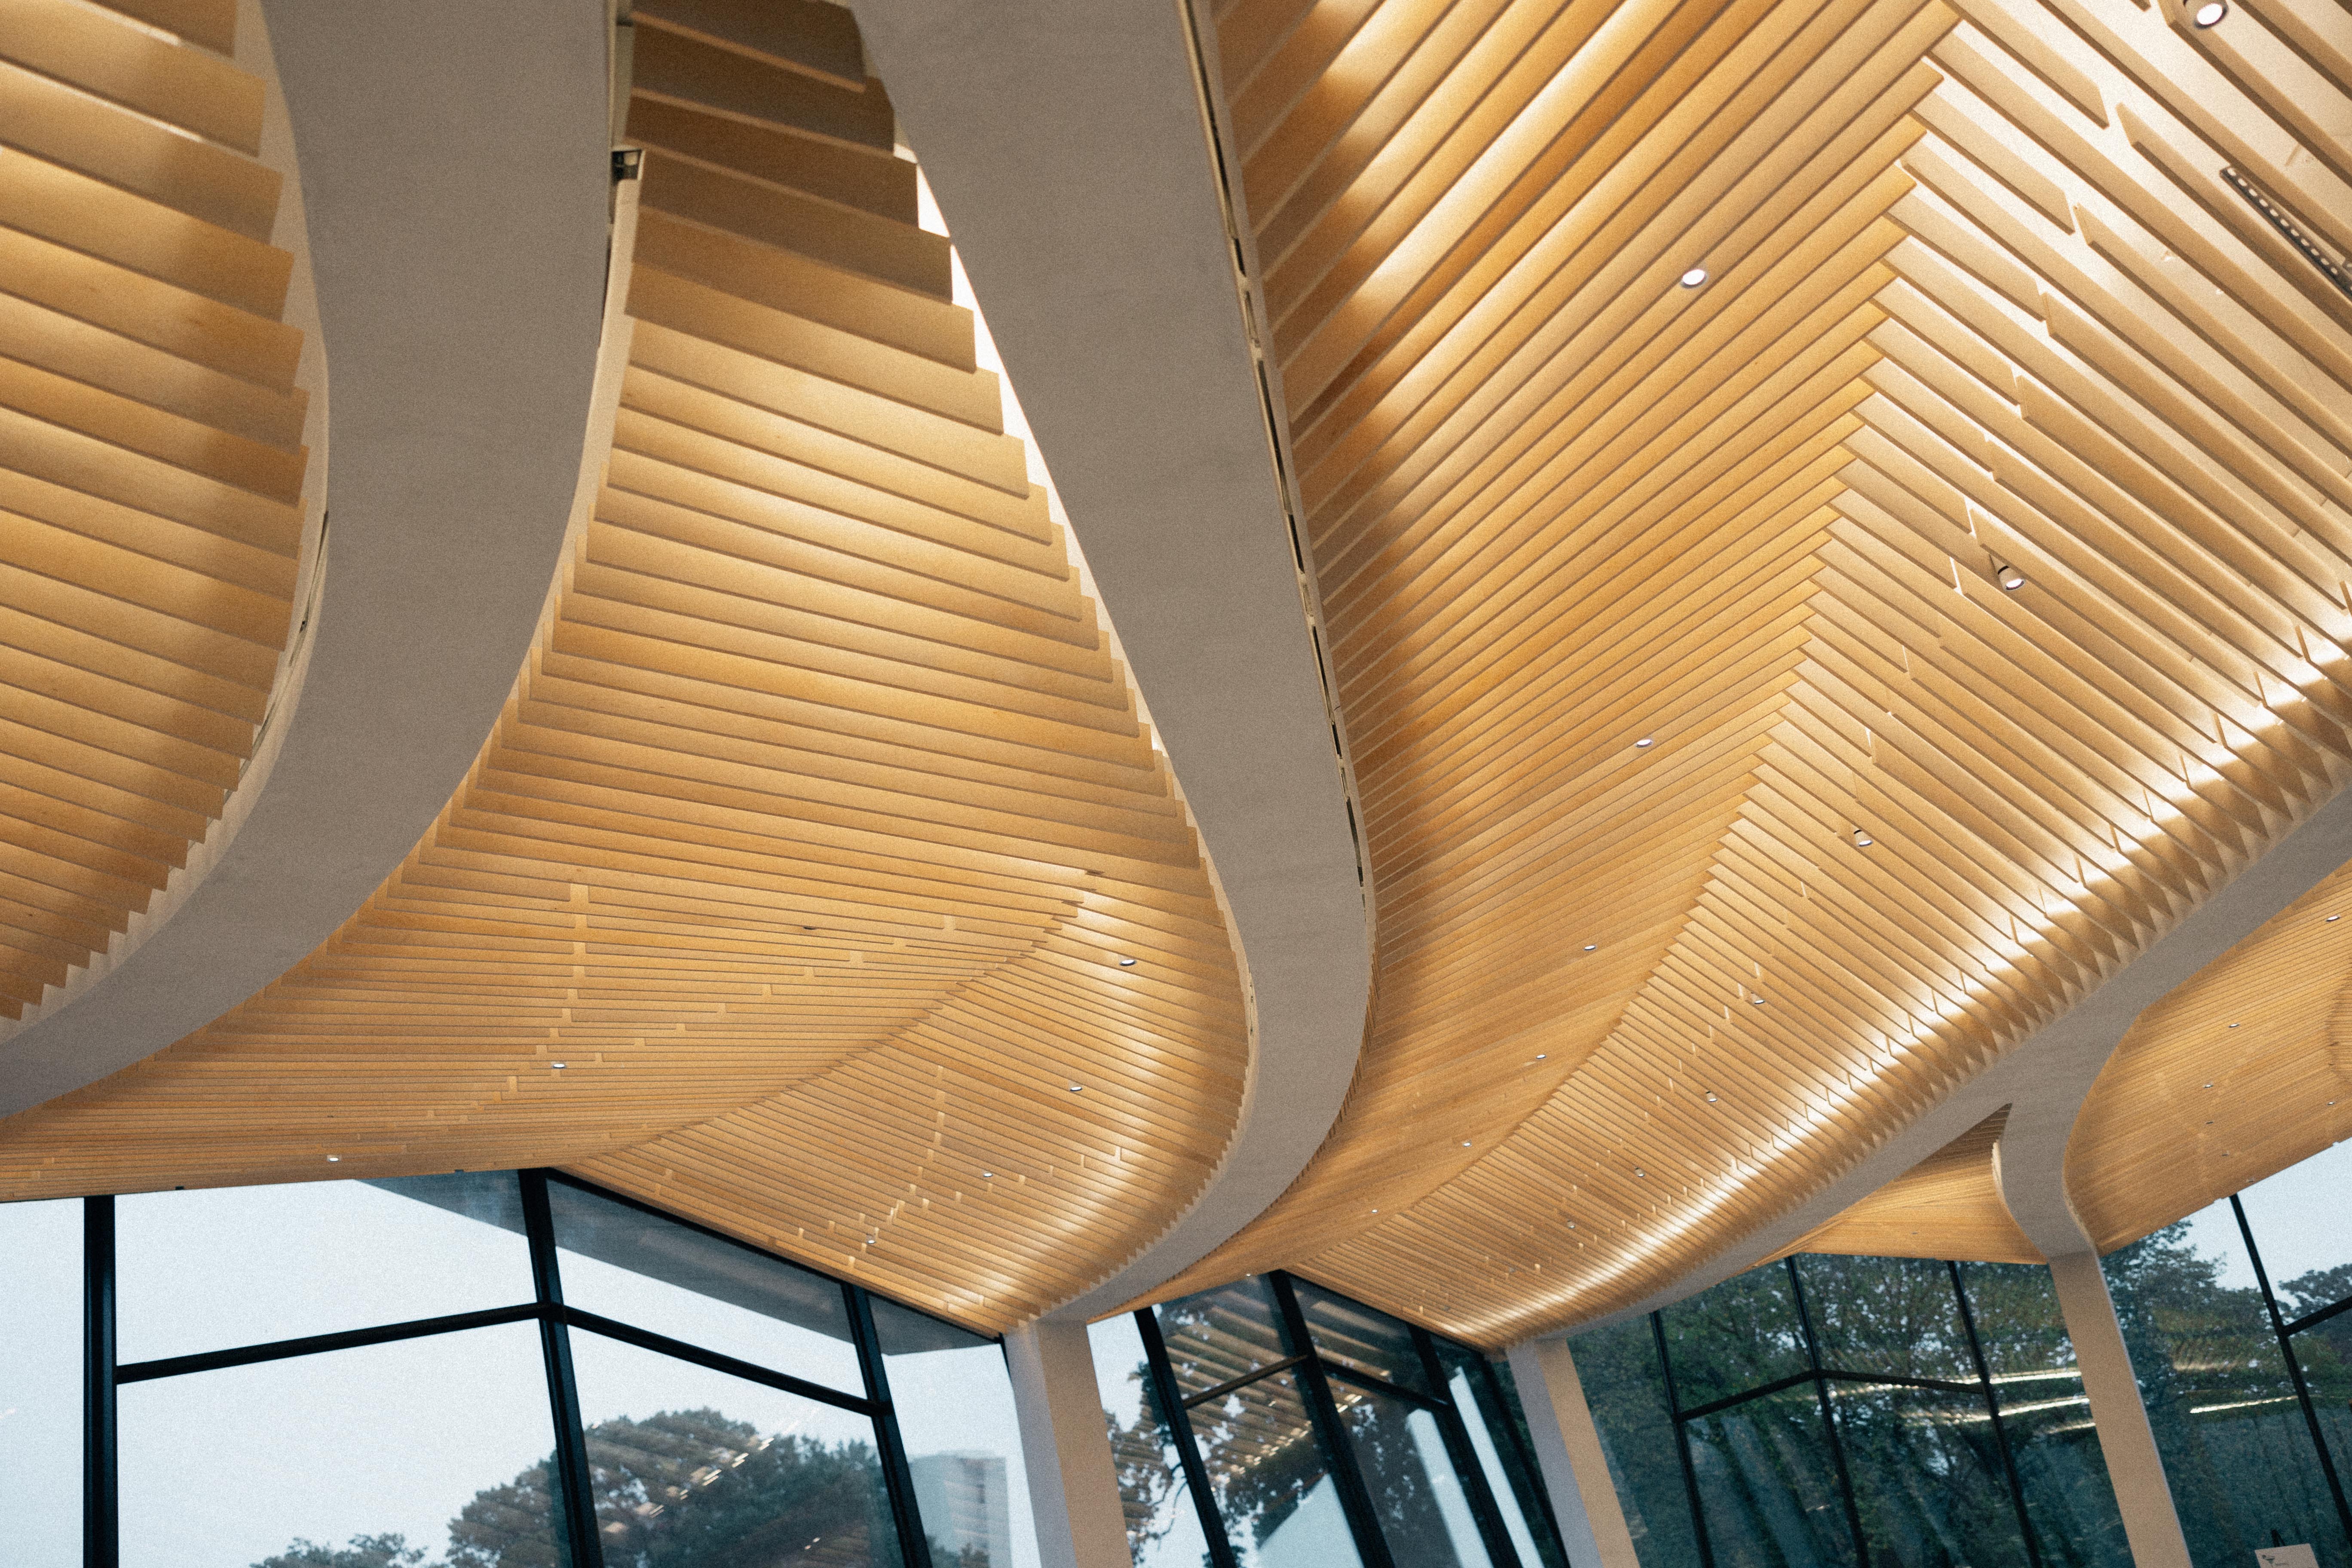 Curved ceiling at AMFA